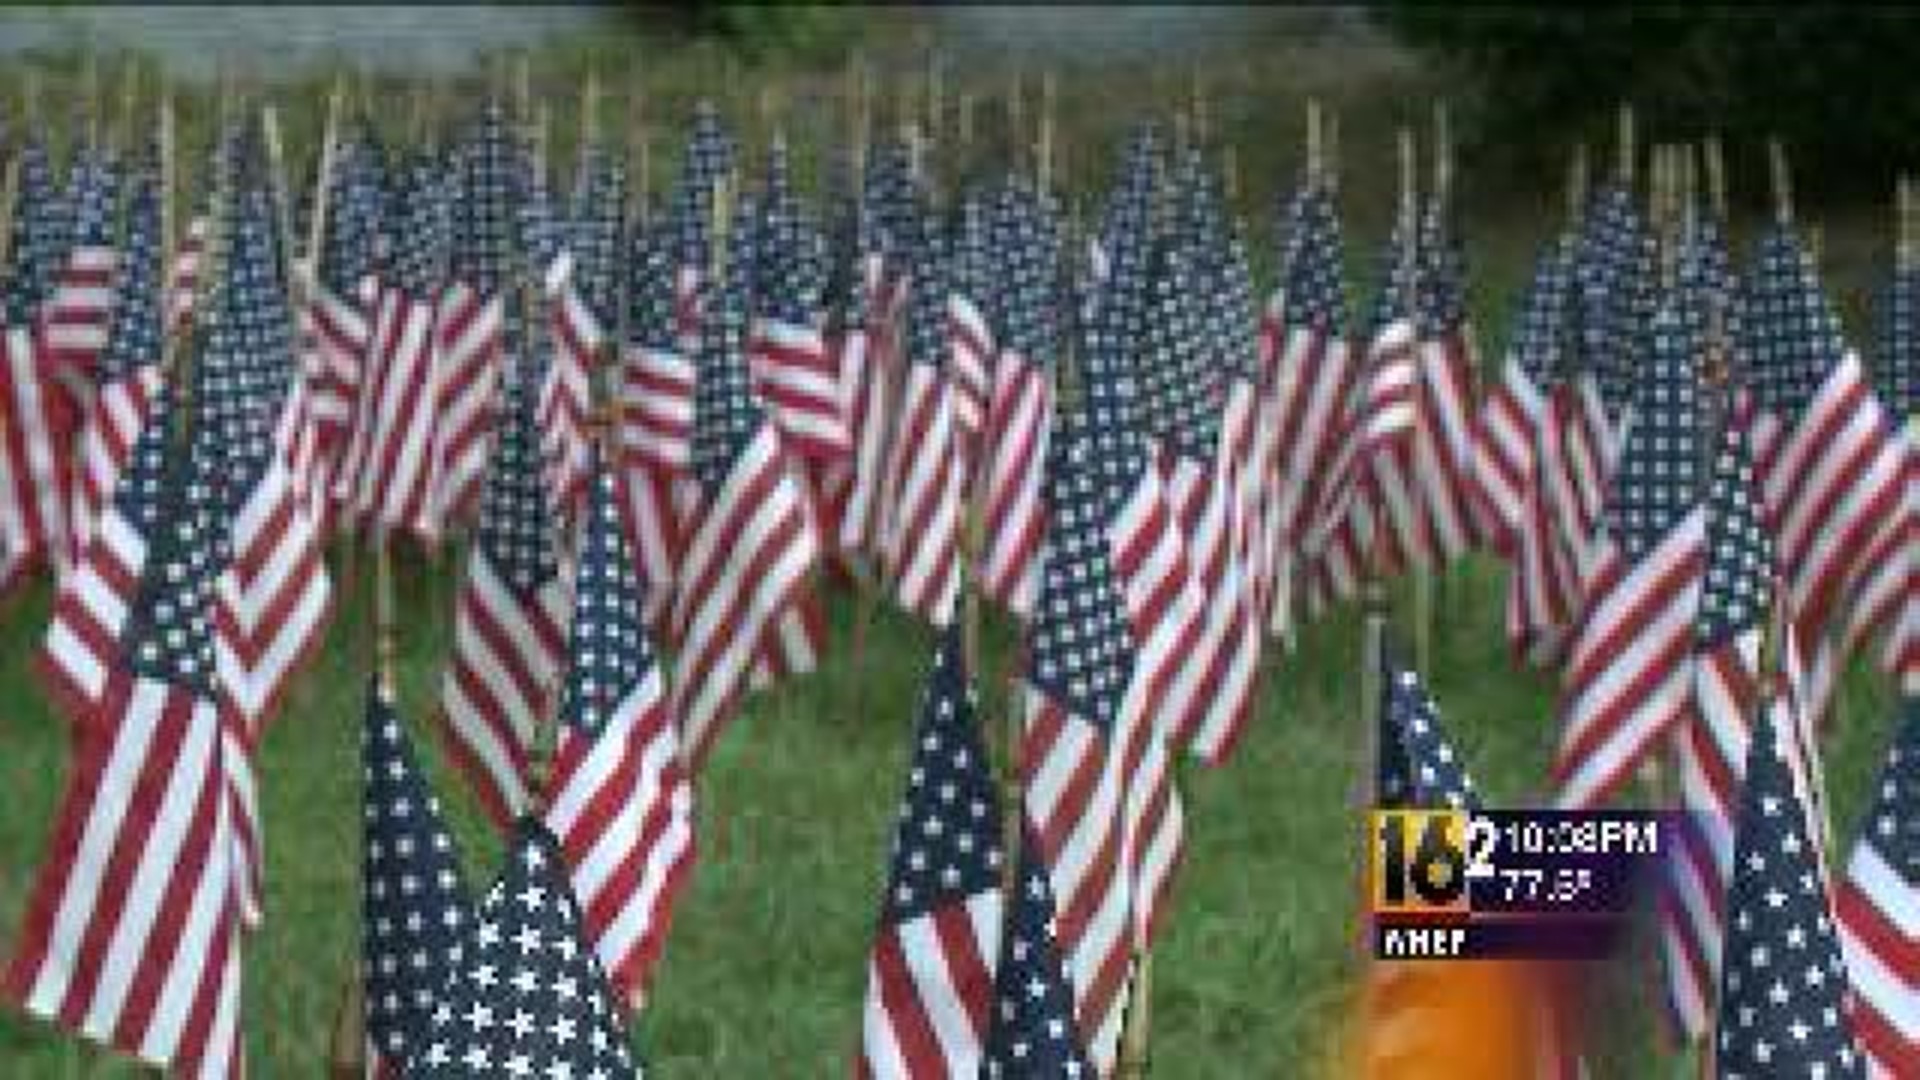 Flags, Families, and Fun at "All Home Days"